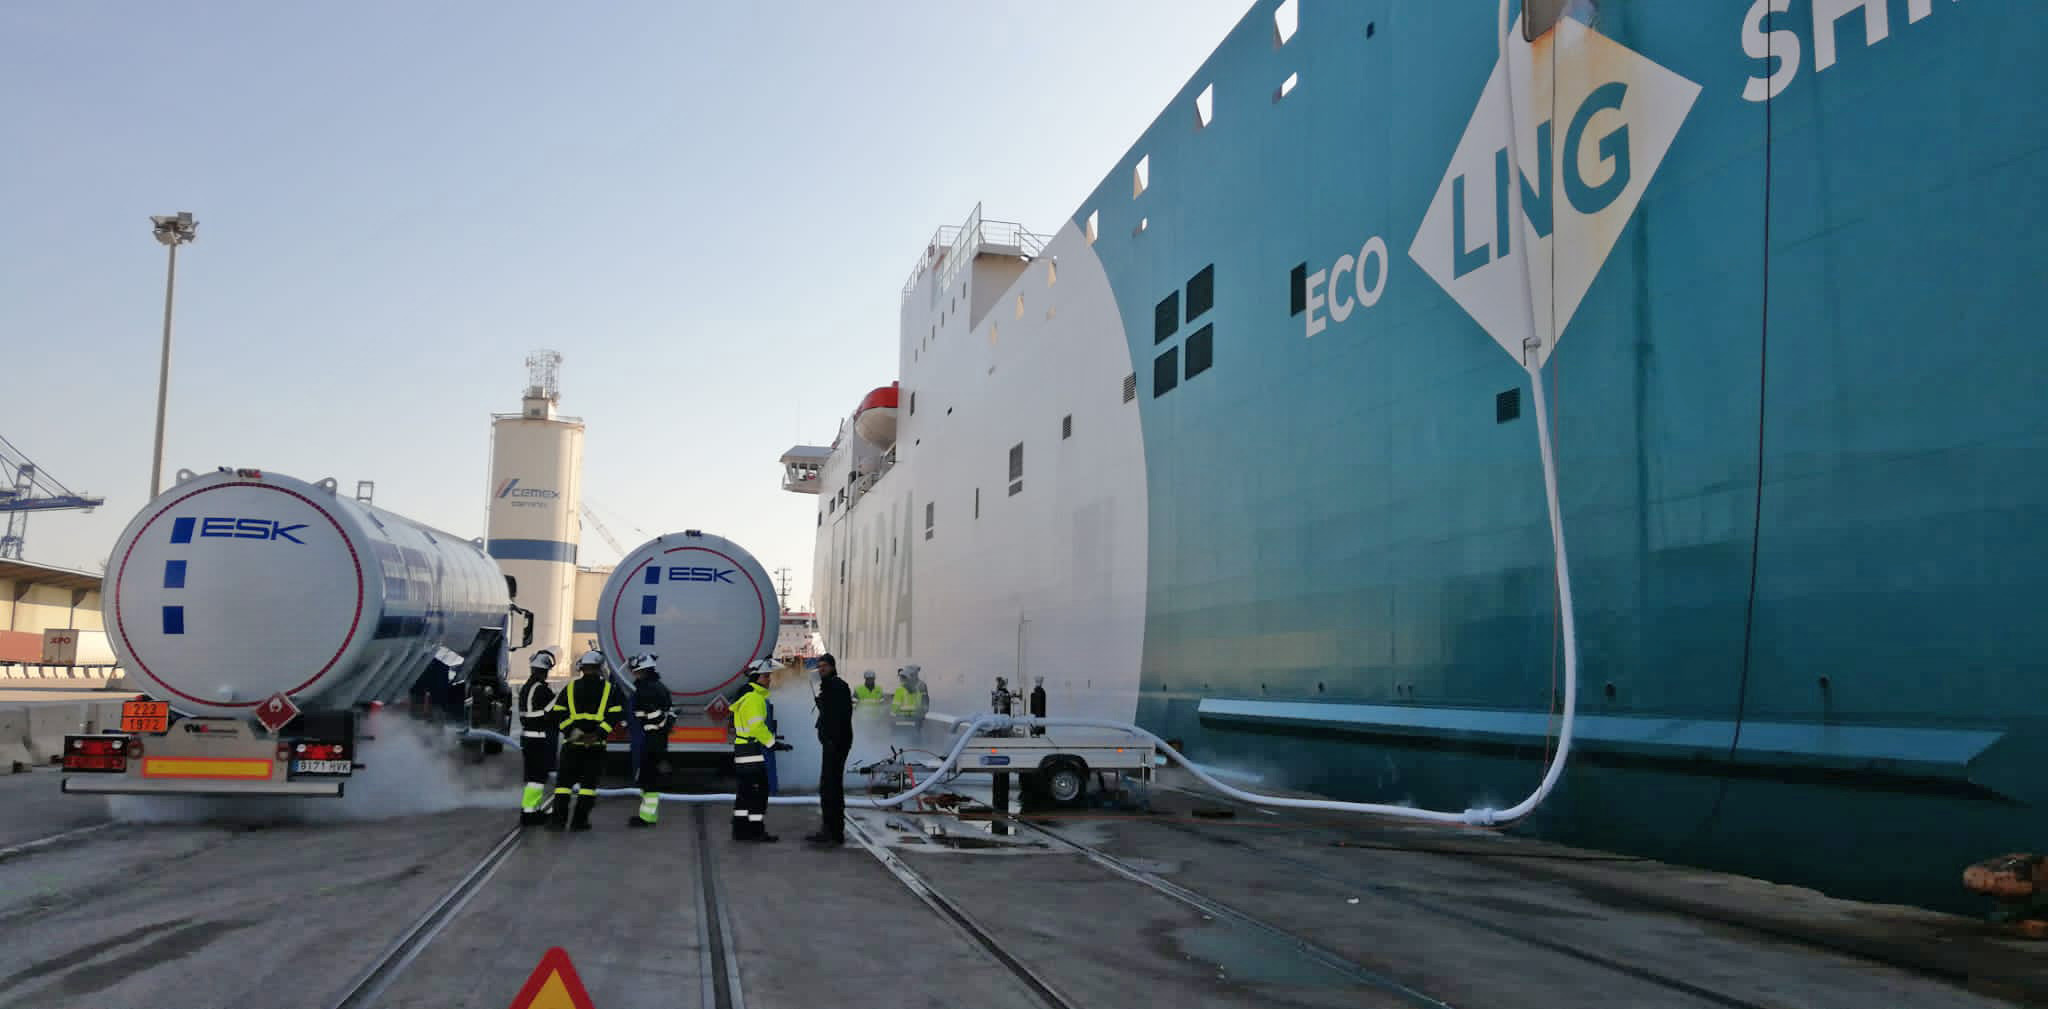 Baleària sets up MTTS LNG bunkering facility in port of Valencia